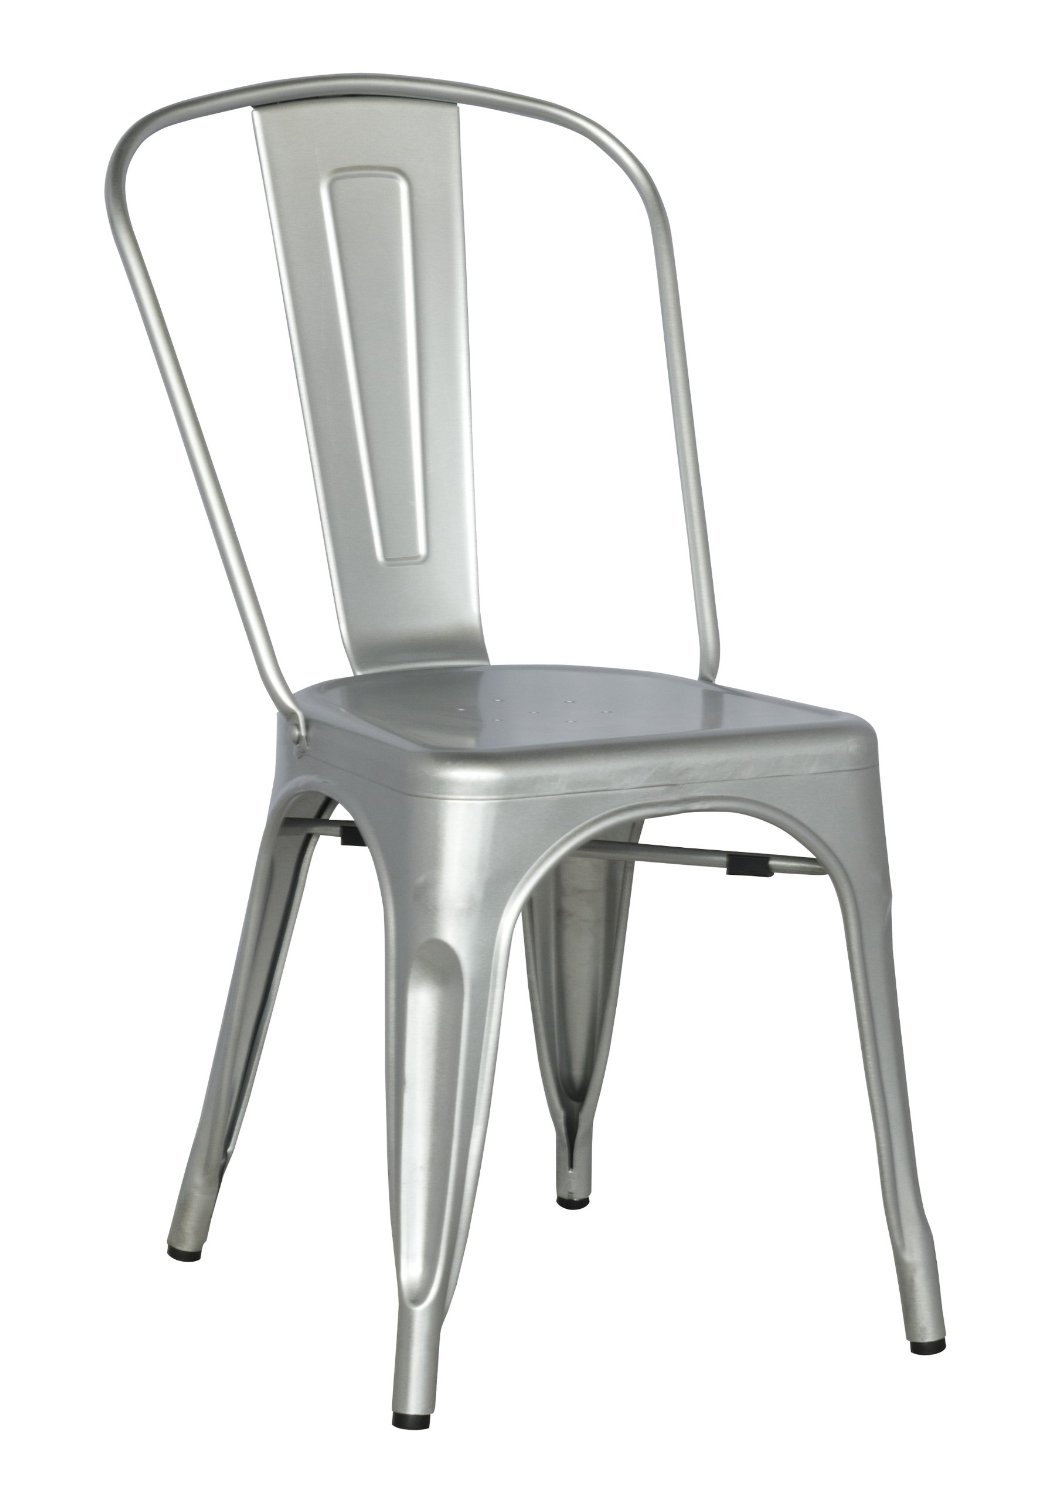 Chintaly Imports Galvanized Steel Side Chair With 5 Stylish Colors, Shiny Silver